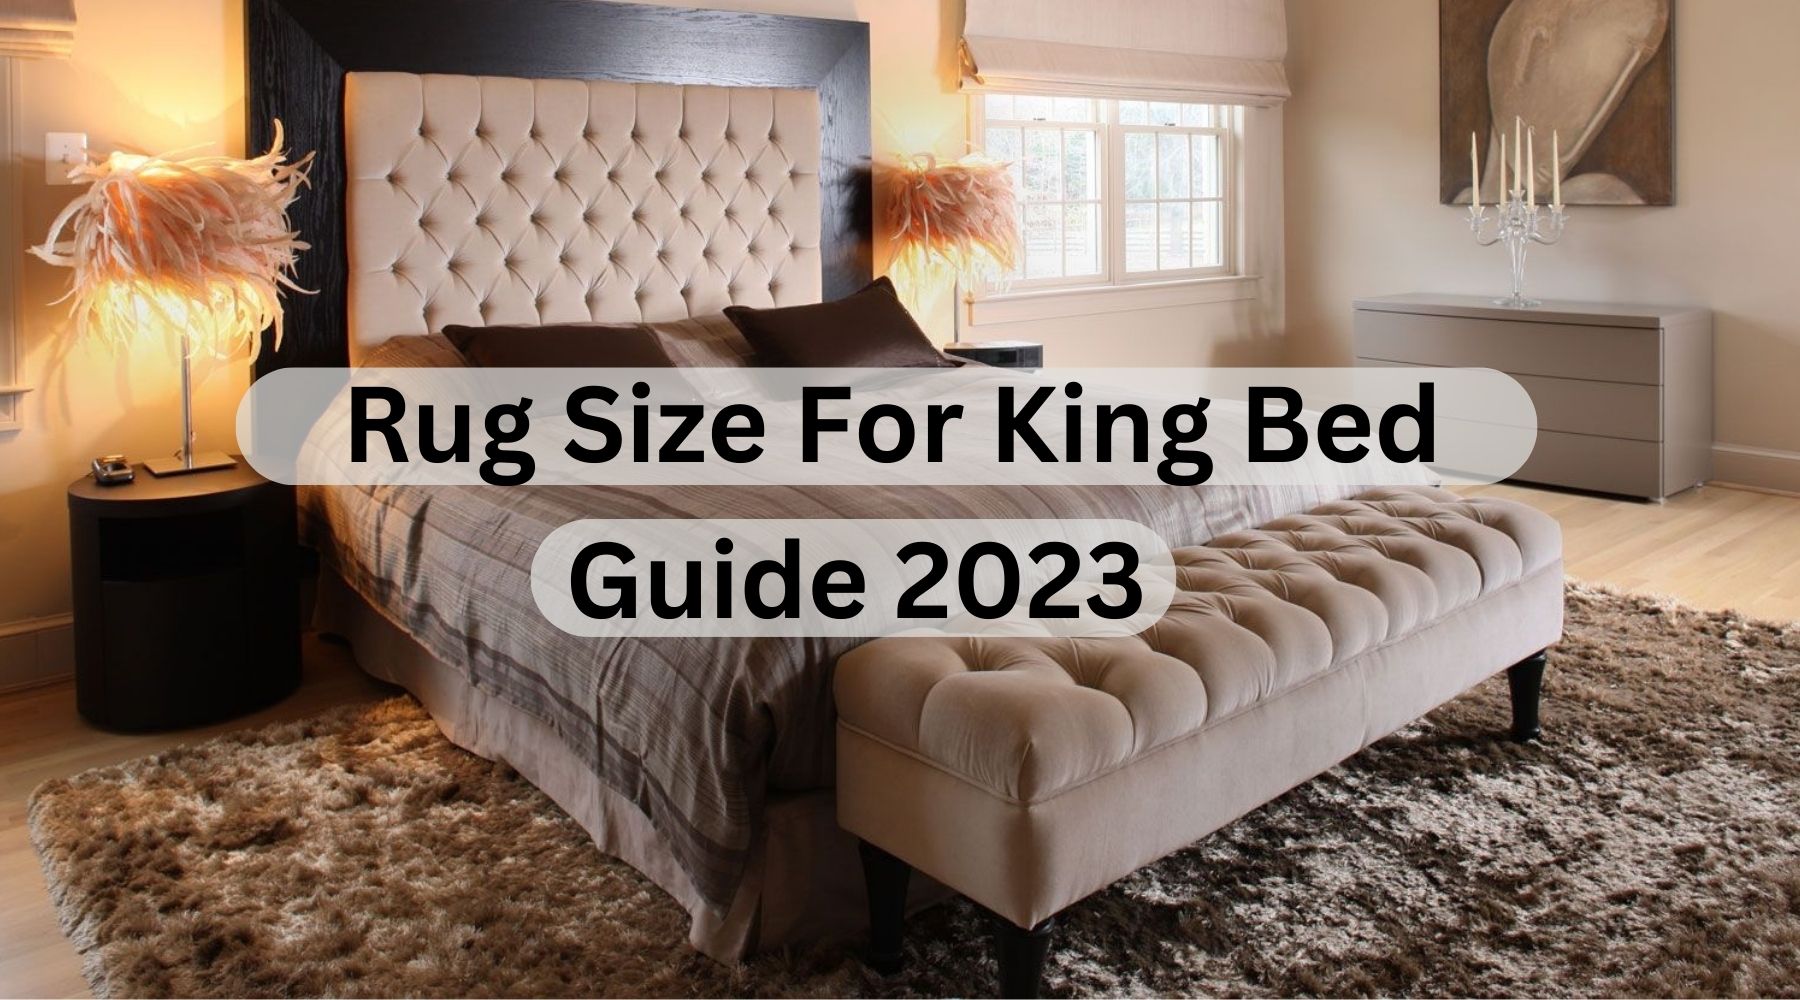 King Beds in Beds 